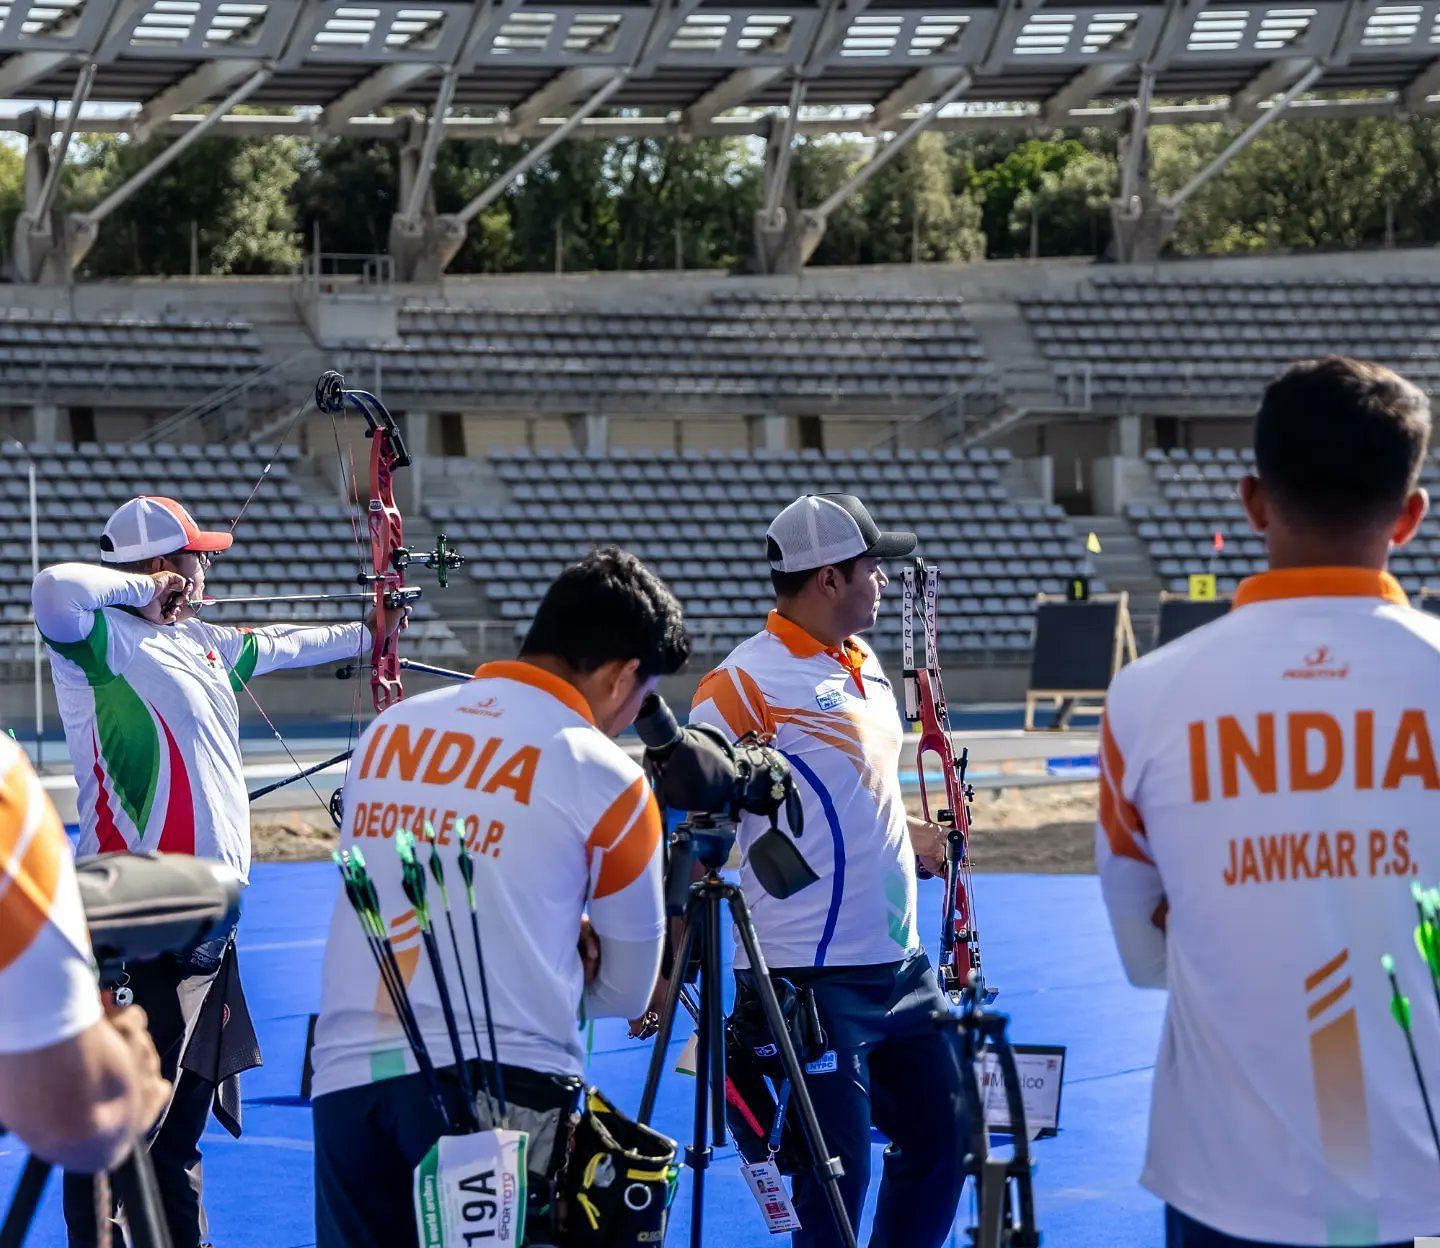 Indian compound archers triumph in Archery World Cup stage 4, secure final spots and two medals (Image via Archery Association of India)